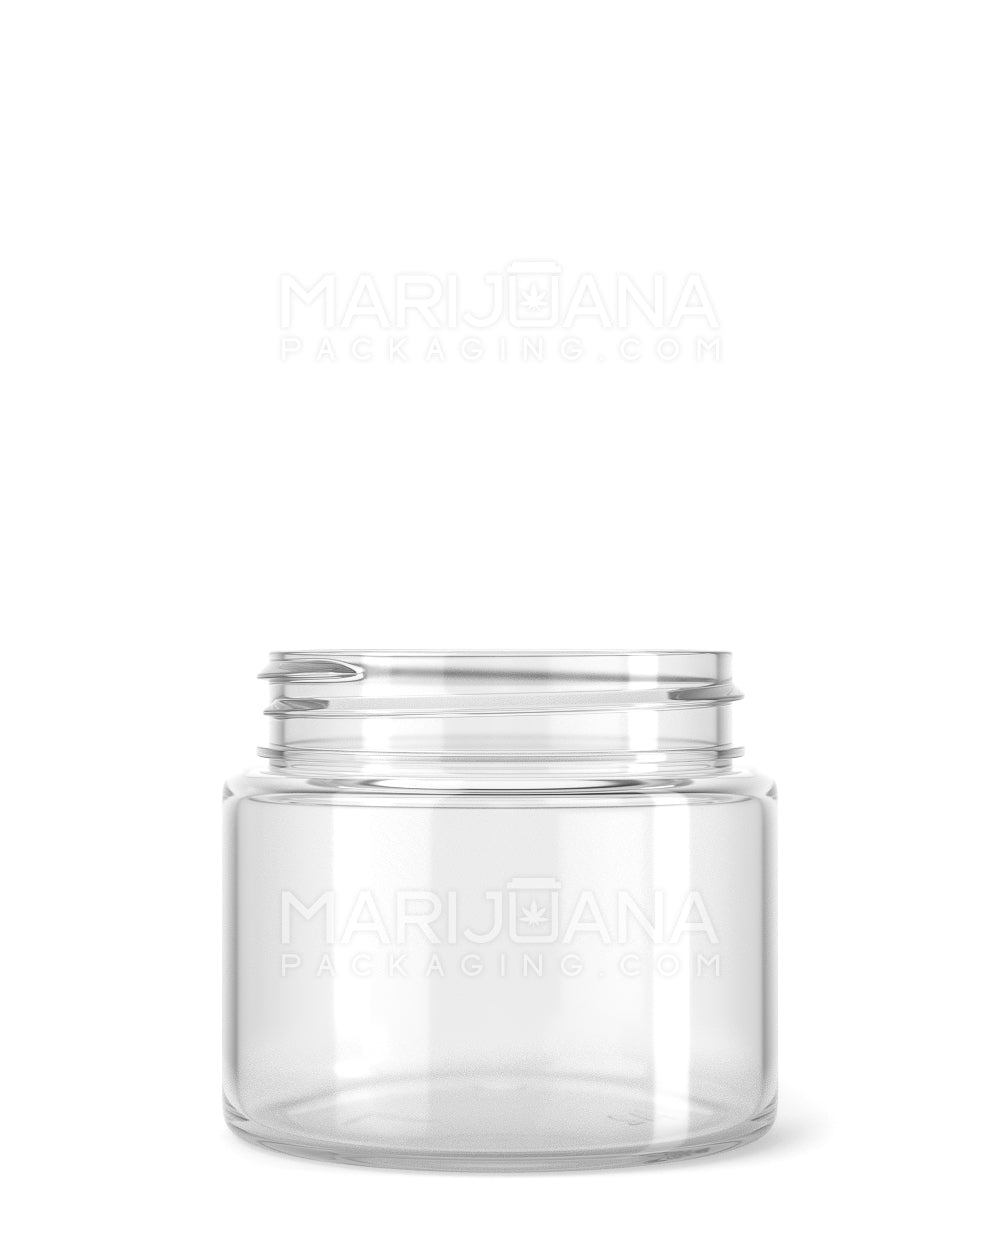 Straight Sided Clear Plastic Jars | 53mm - 3oz - 100 Count - 1